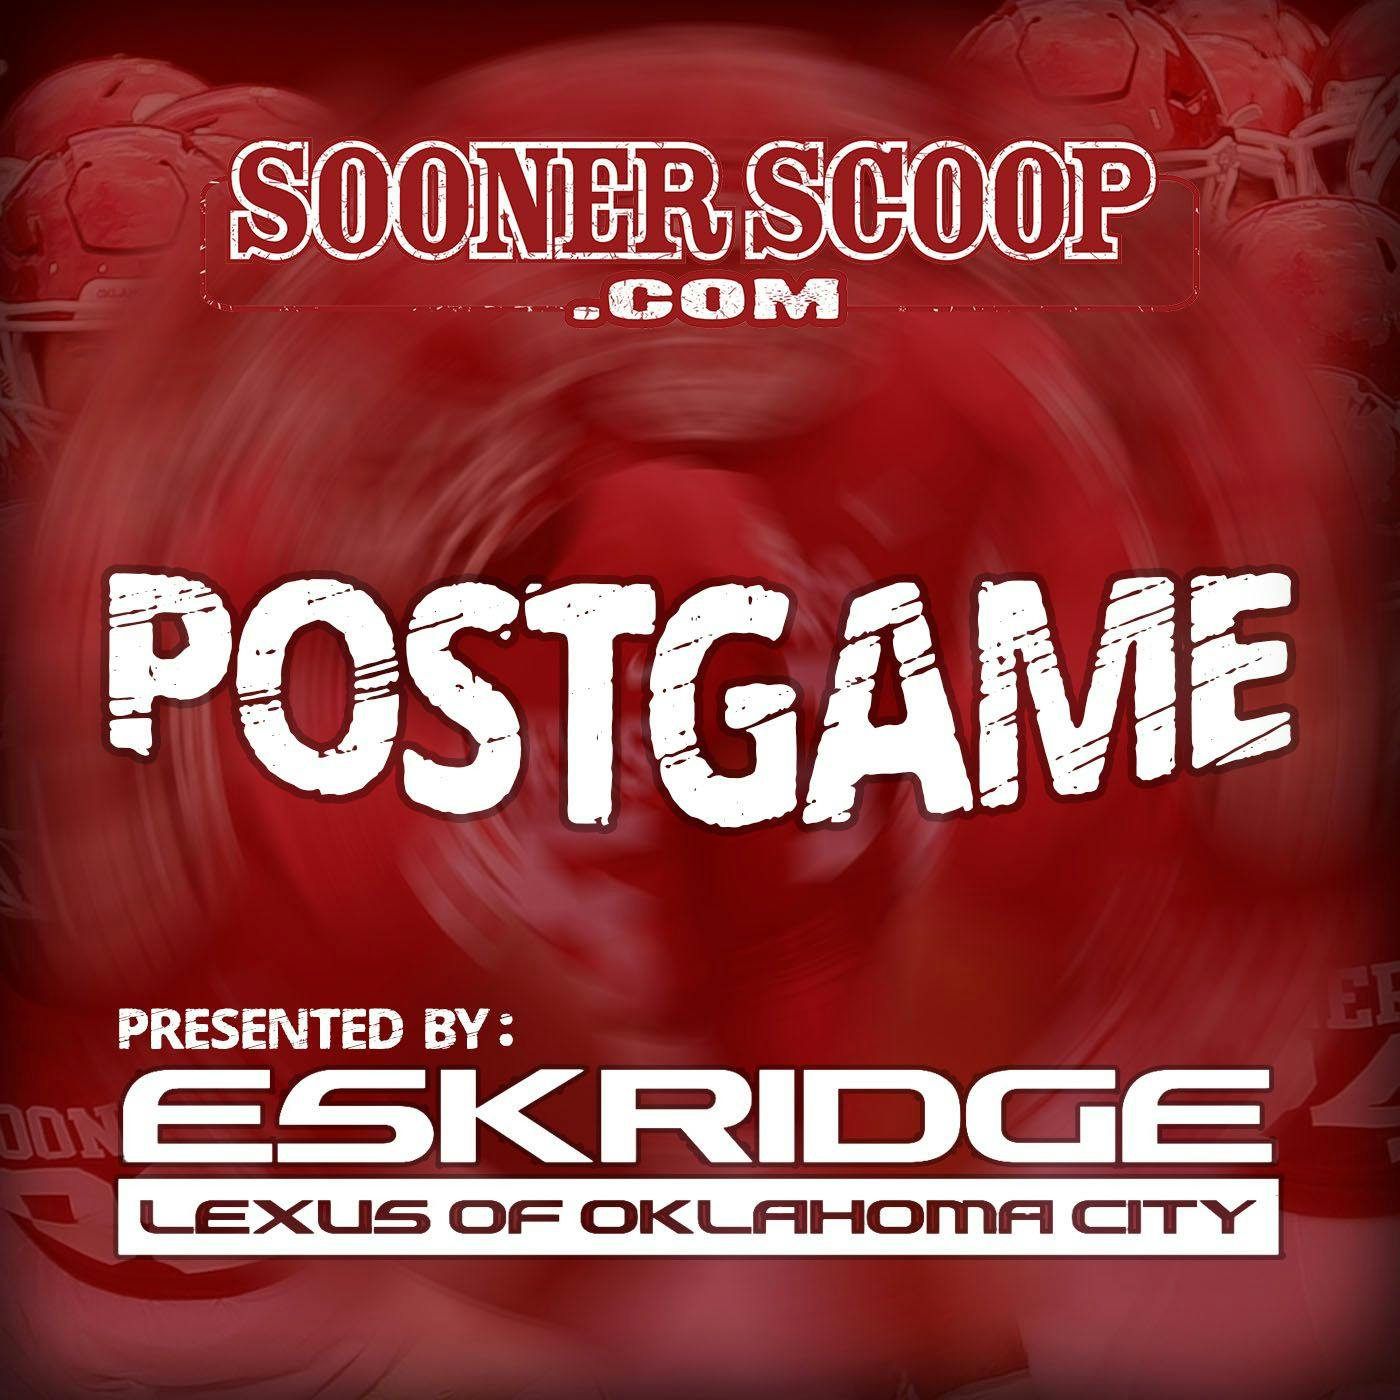 OU wins 62-9 over KU. Rattler gave us a scare and Stogner is a concern